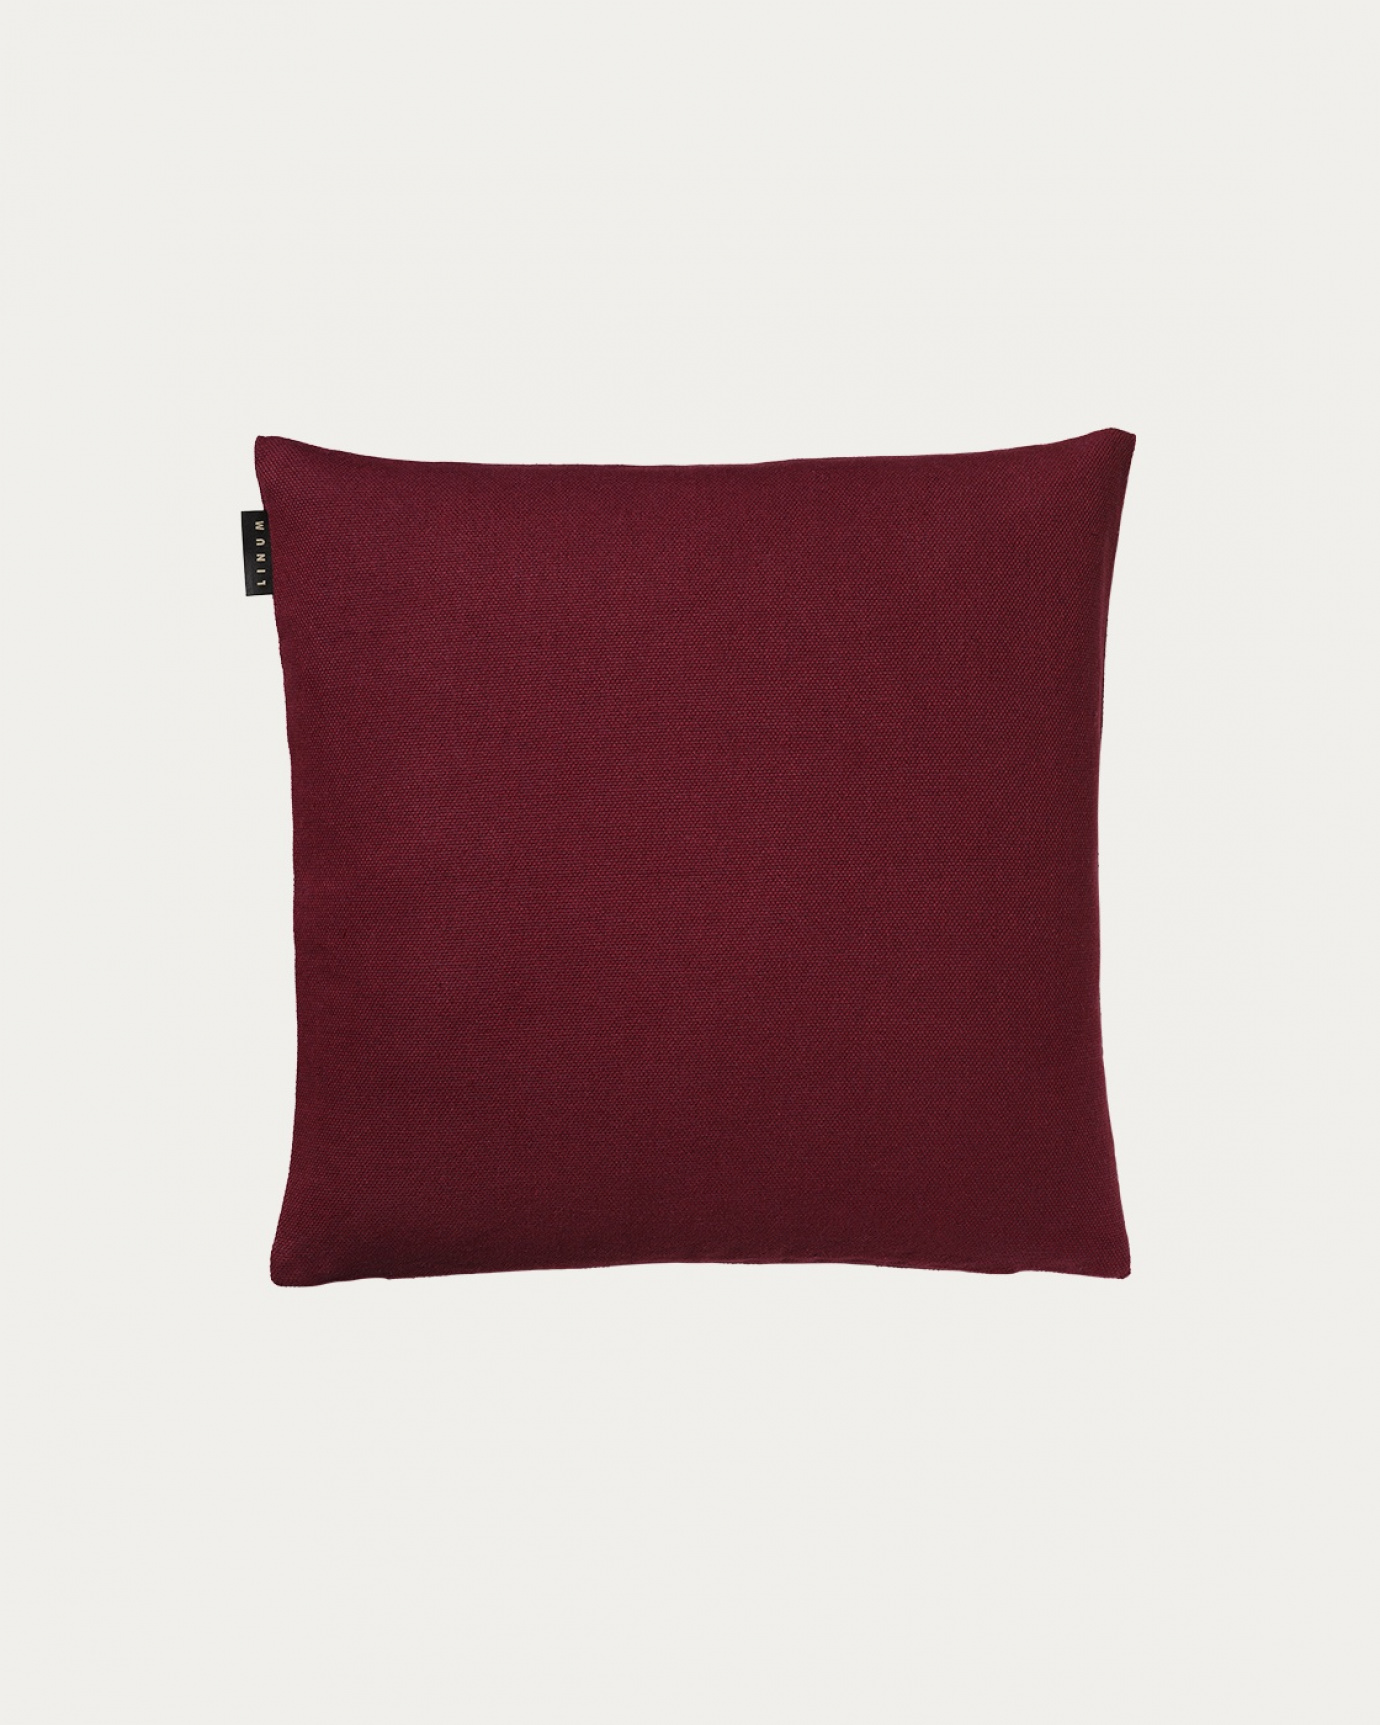 Product image burgundy red PEPPER cushion cover made of soft cotton from LINUM DESIGN. Easy to wash and durable for generations. Size 40x40 cm.